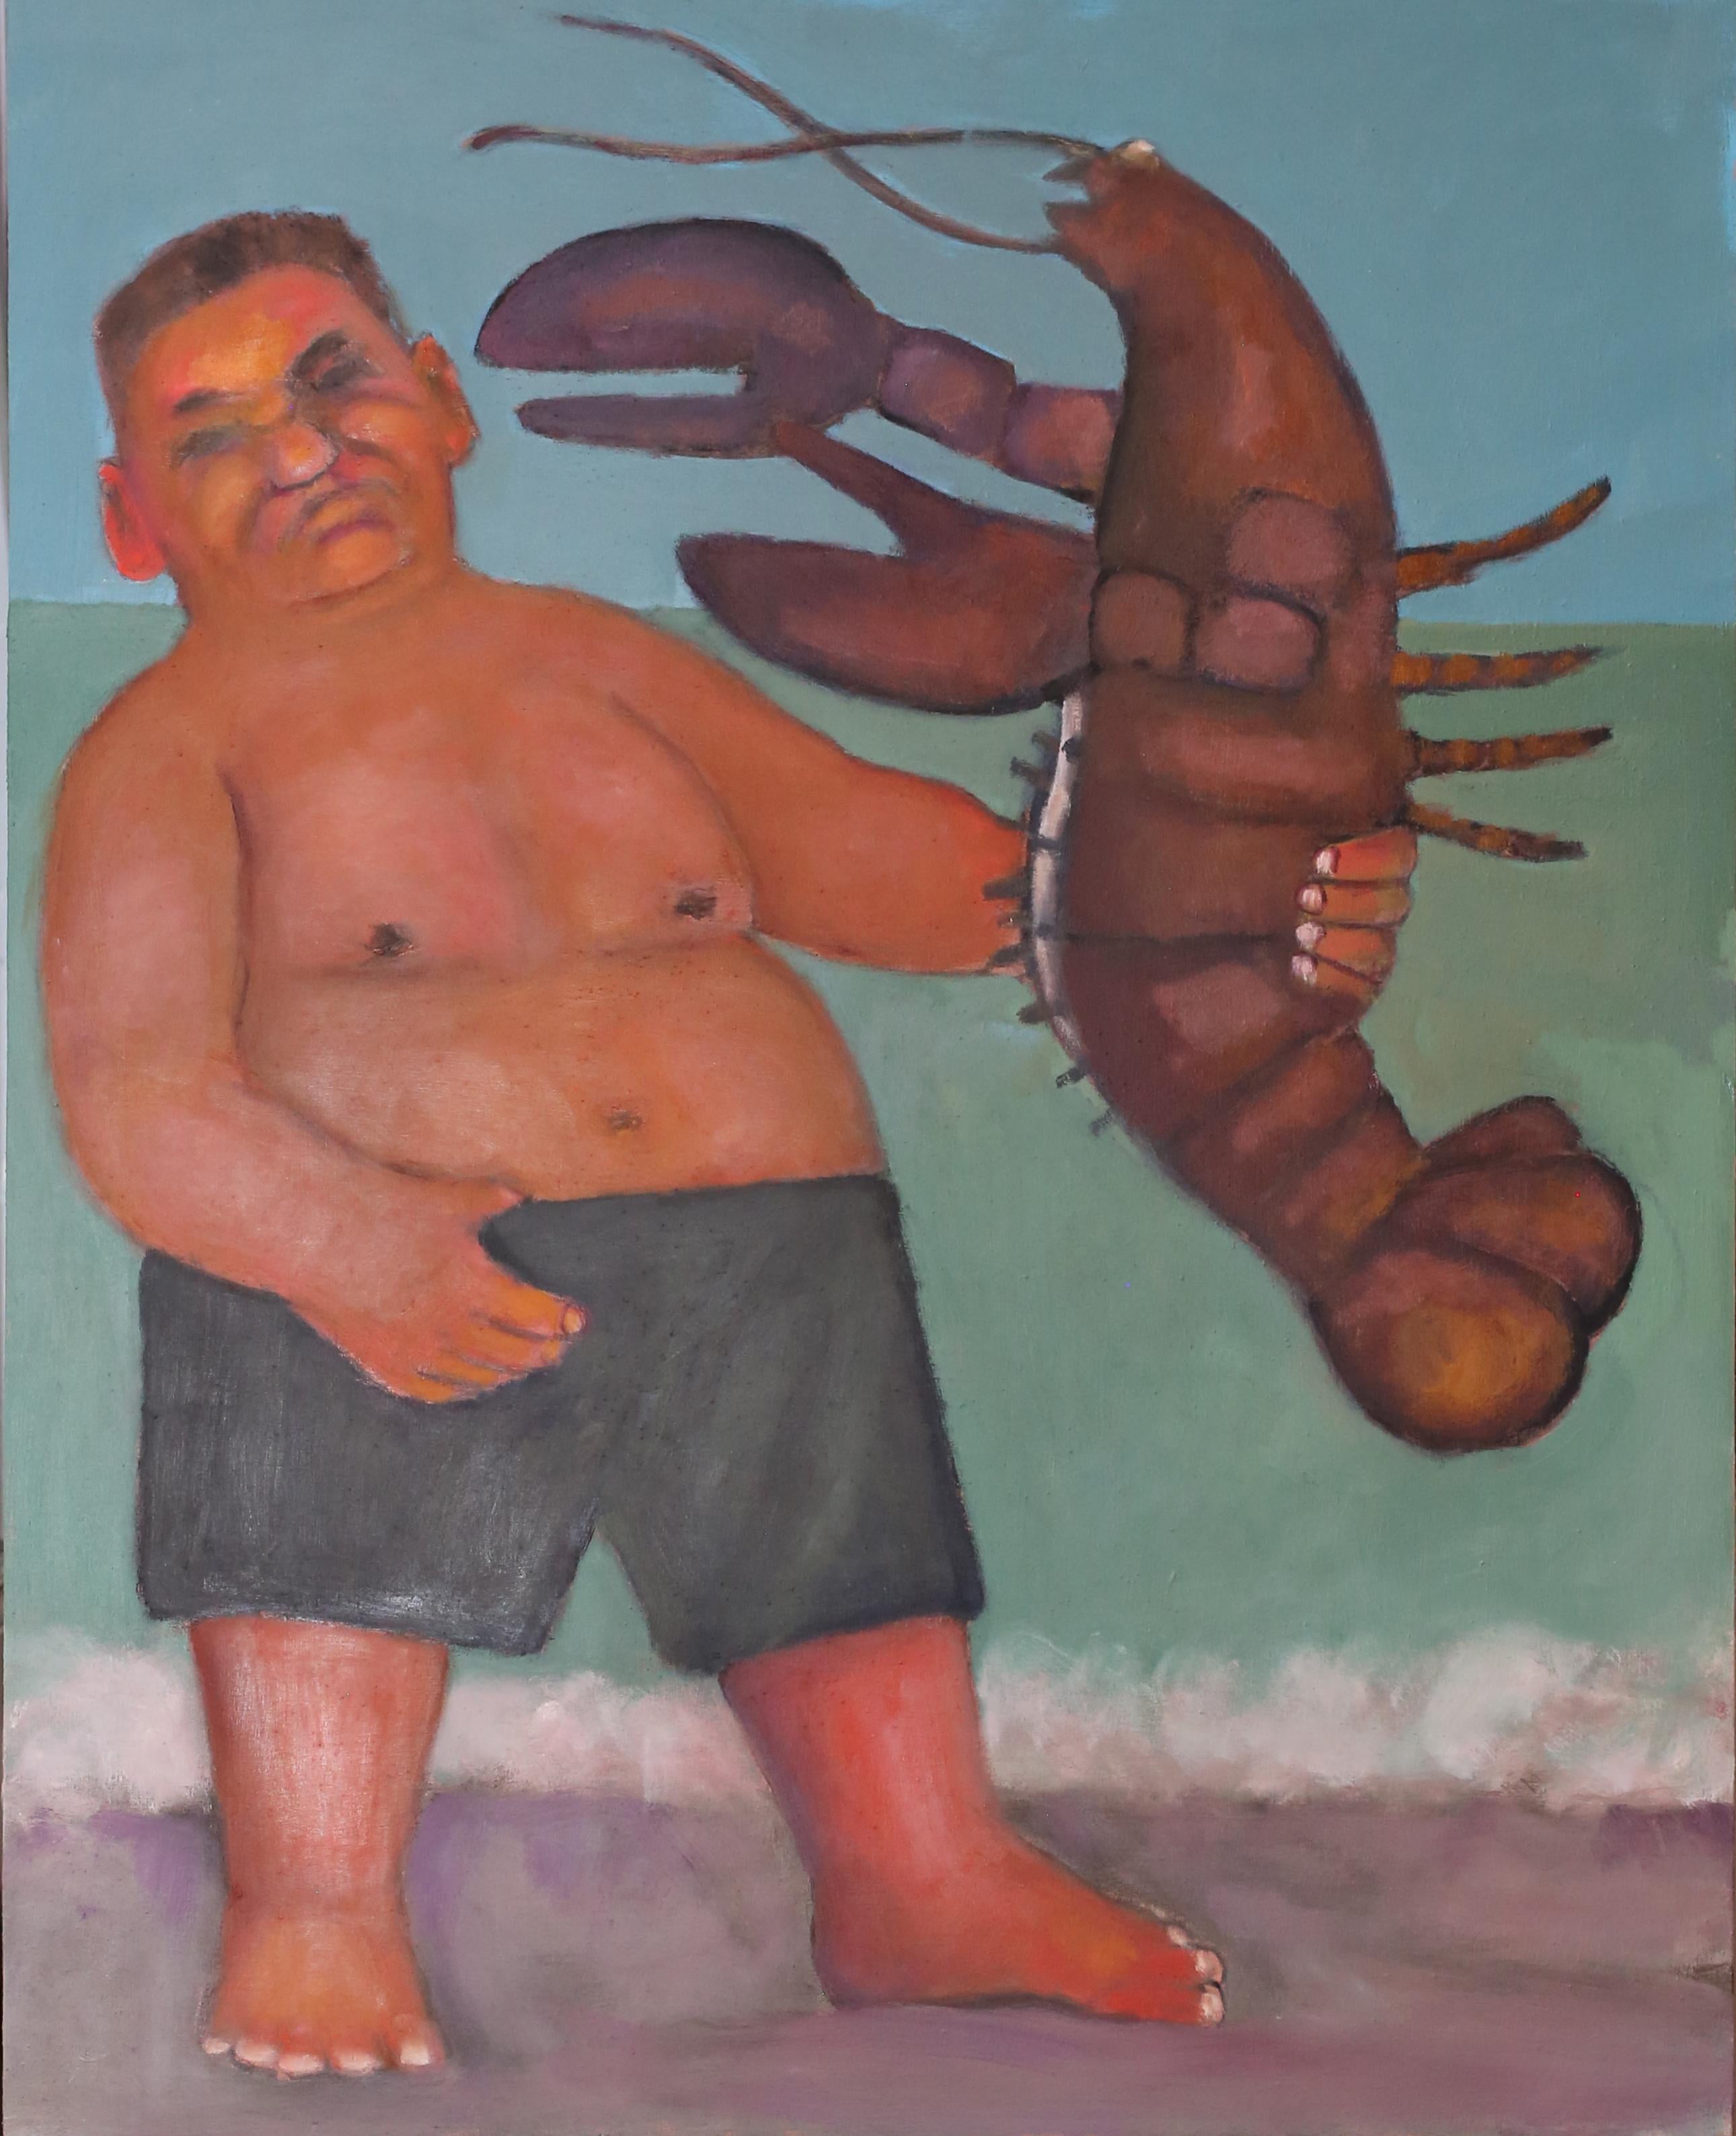 Stephen Basso Figurative Painting - The Boxer. Humorous nature encounter seaside w lobster, soft muted colors